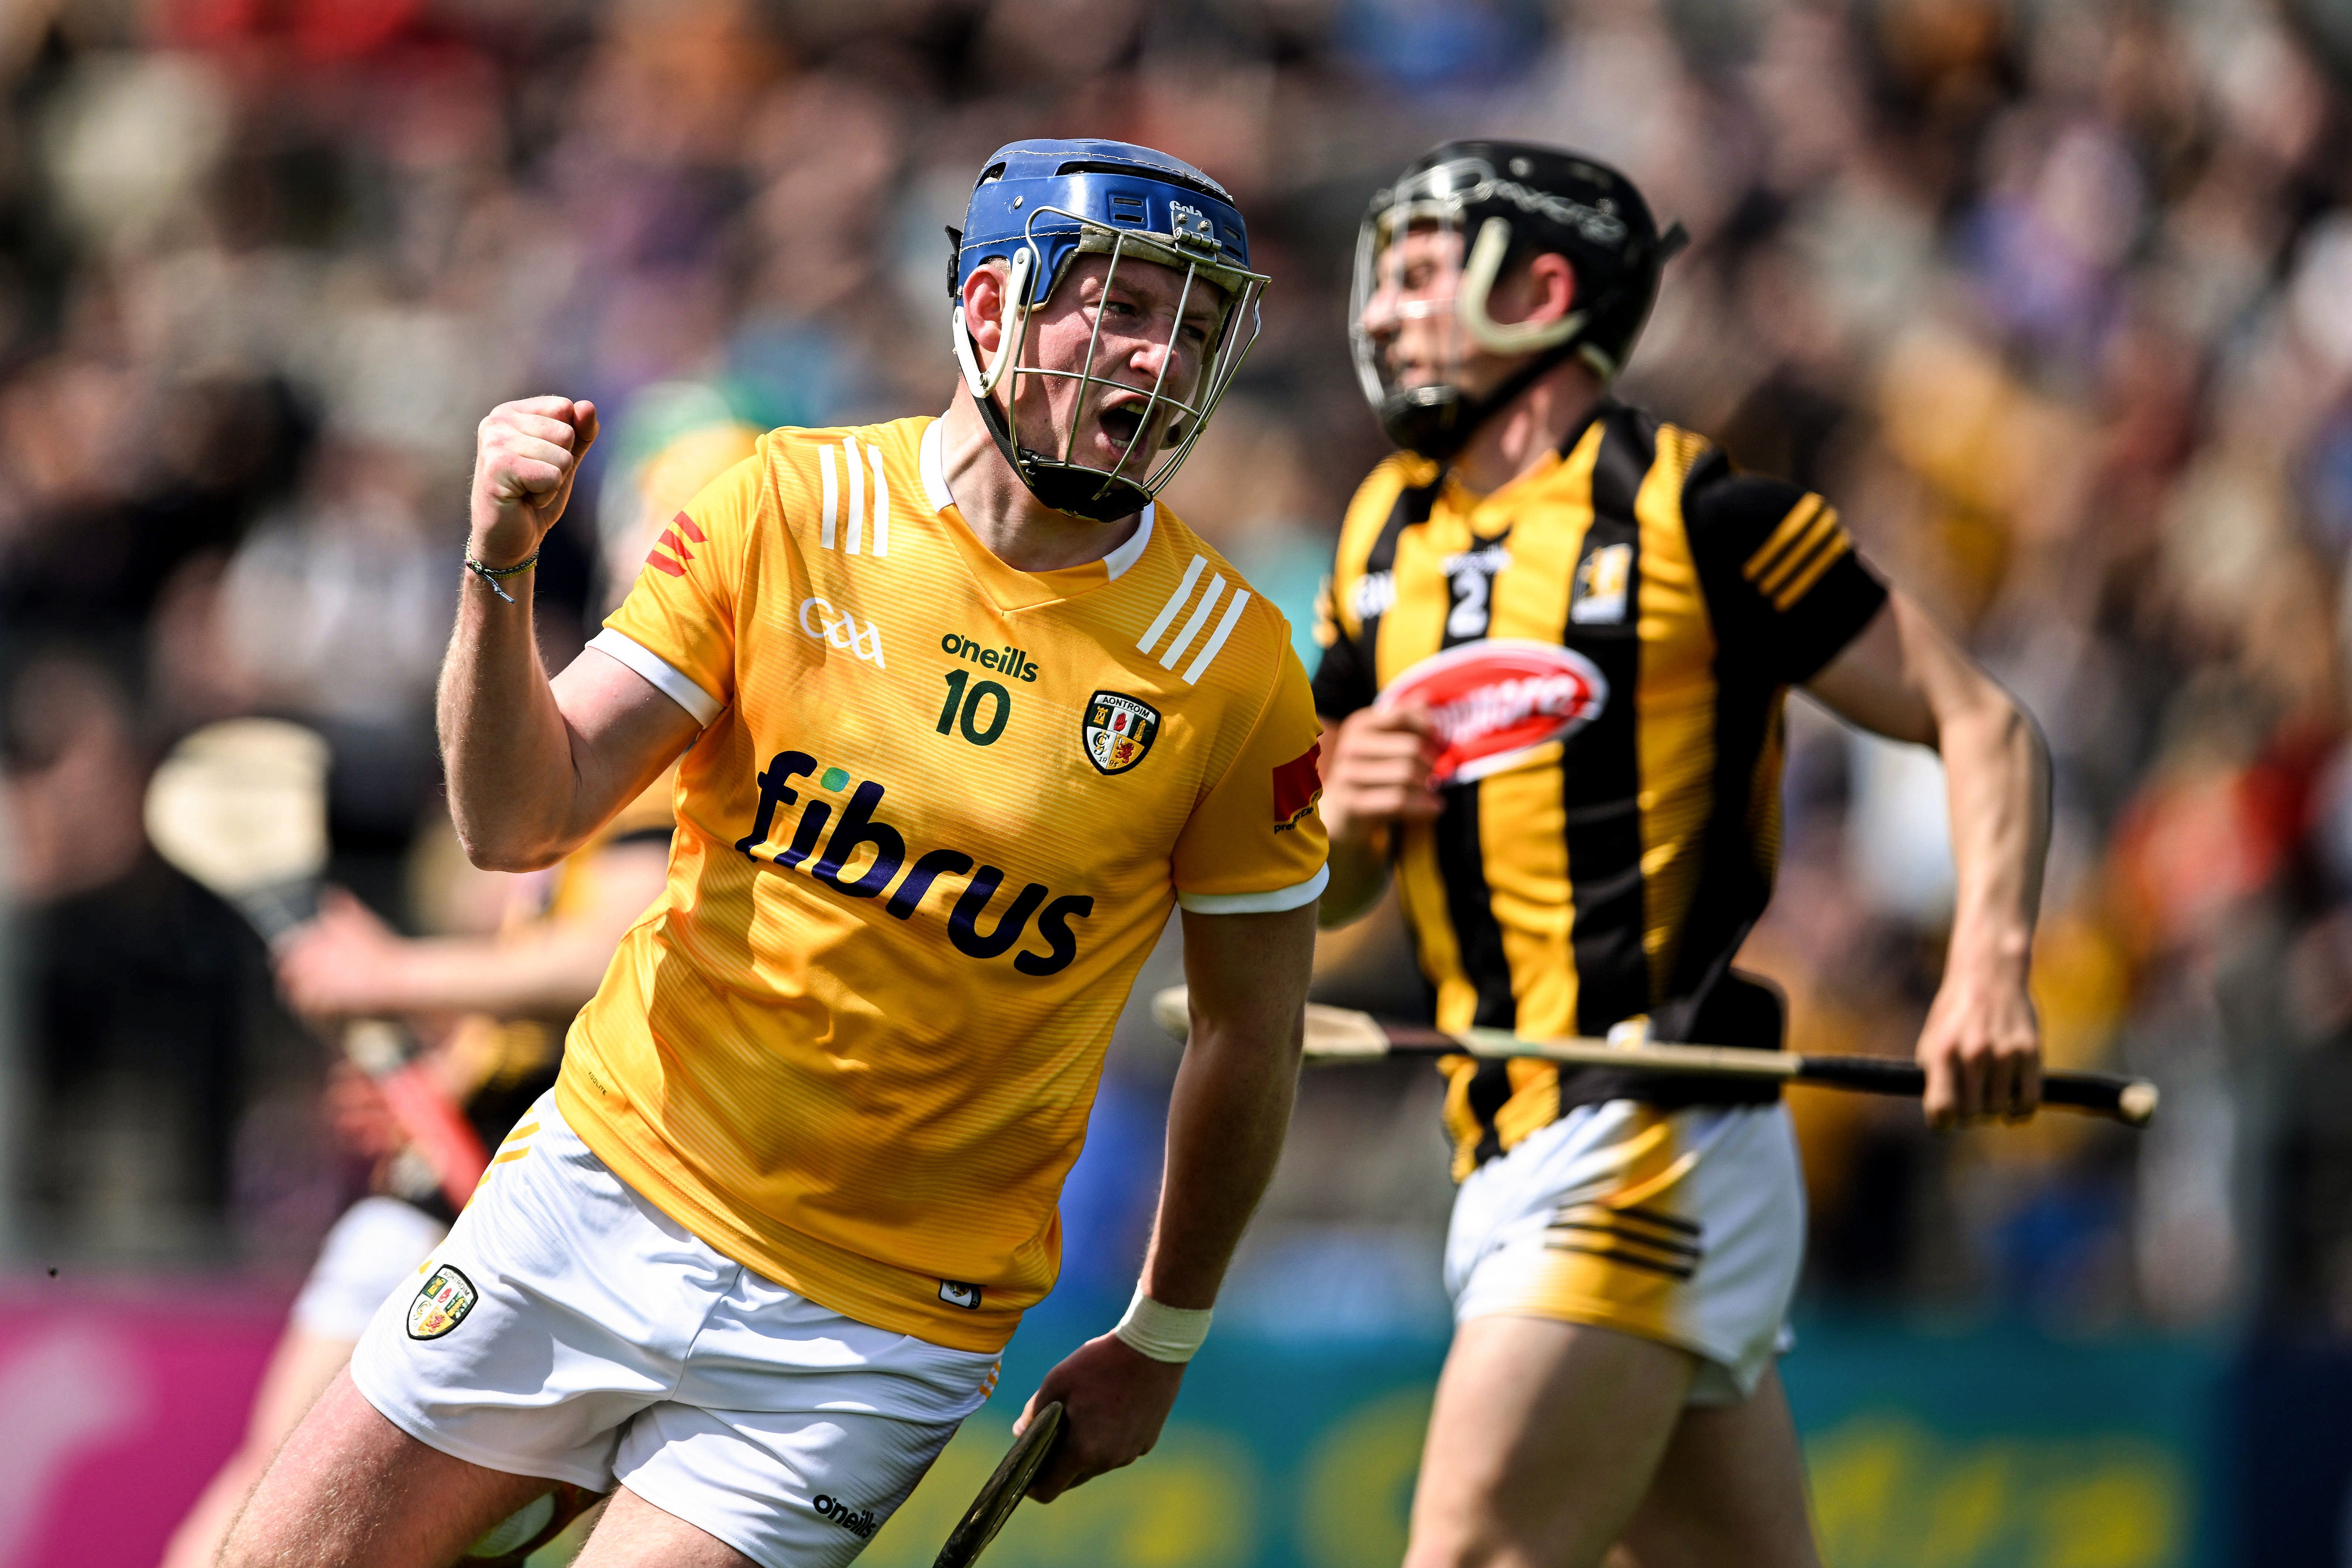 THE FUTURE LOOKS BRIGHT: Is there a better sport than hurling?